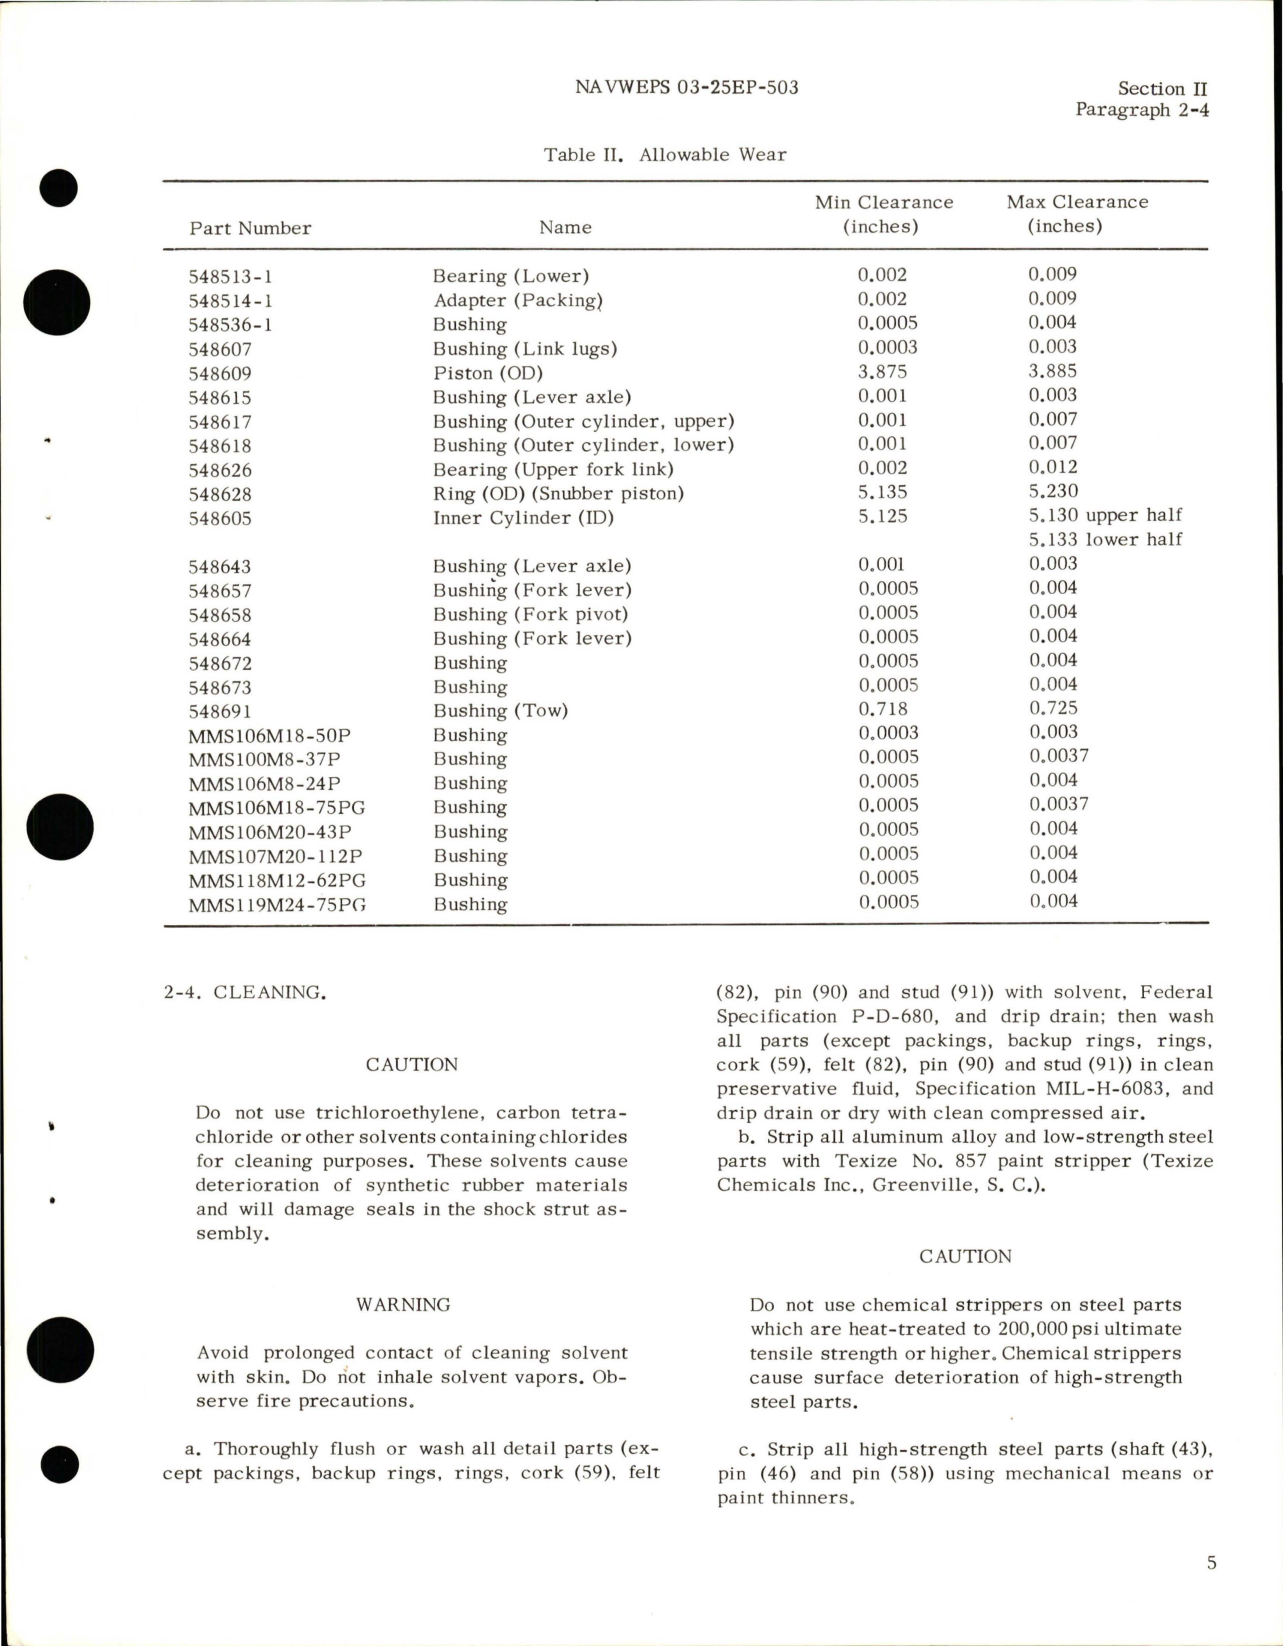 Sample page 7 from AirCorps Library document: Overhaul Instructions for Nose Gear Pneudraulic Shock Strut Assembly - Part 548600 Series